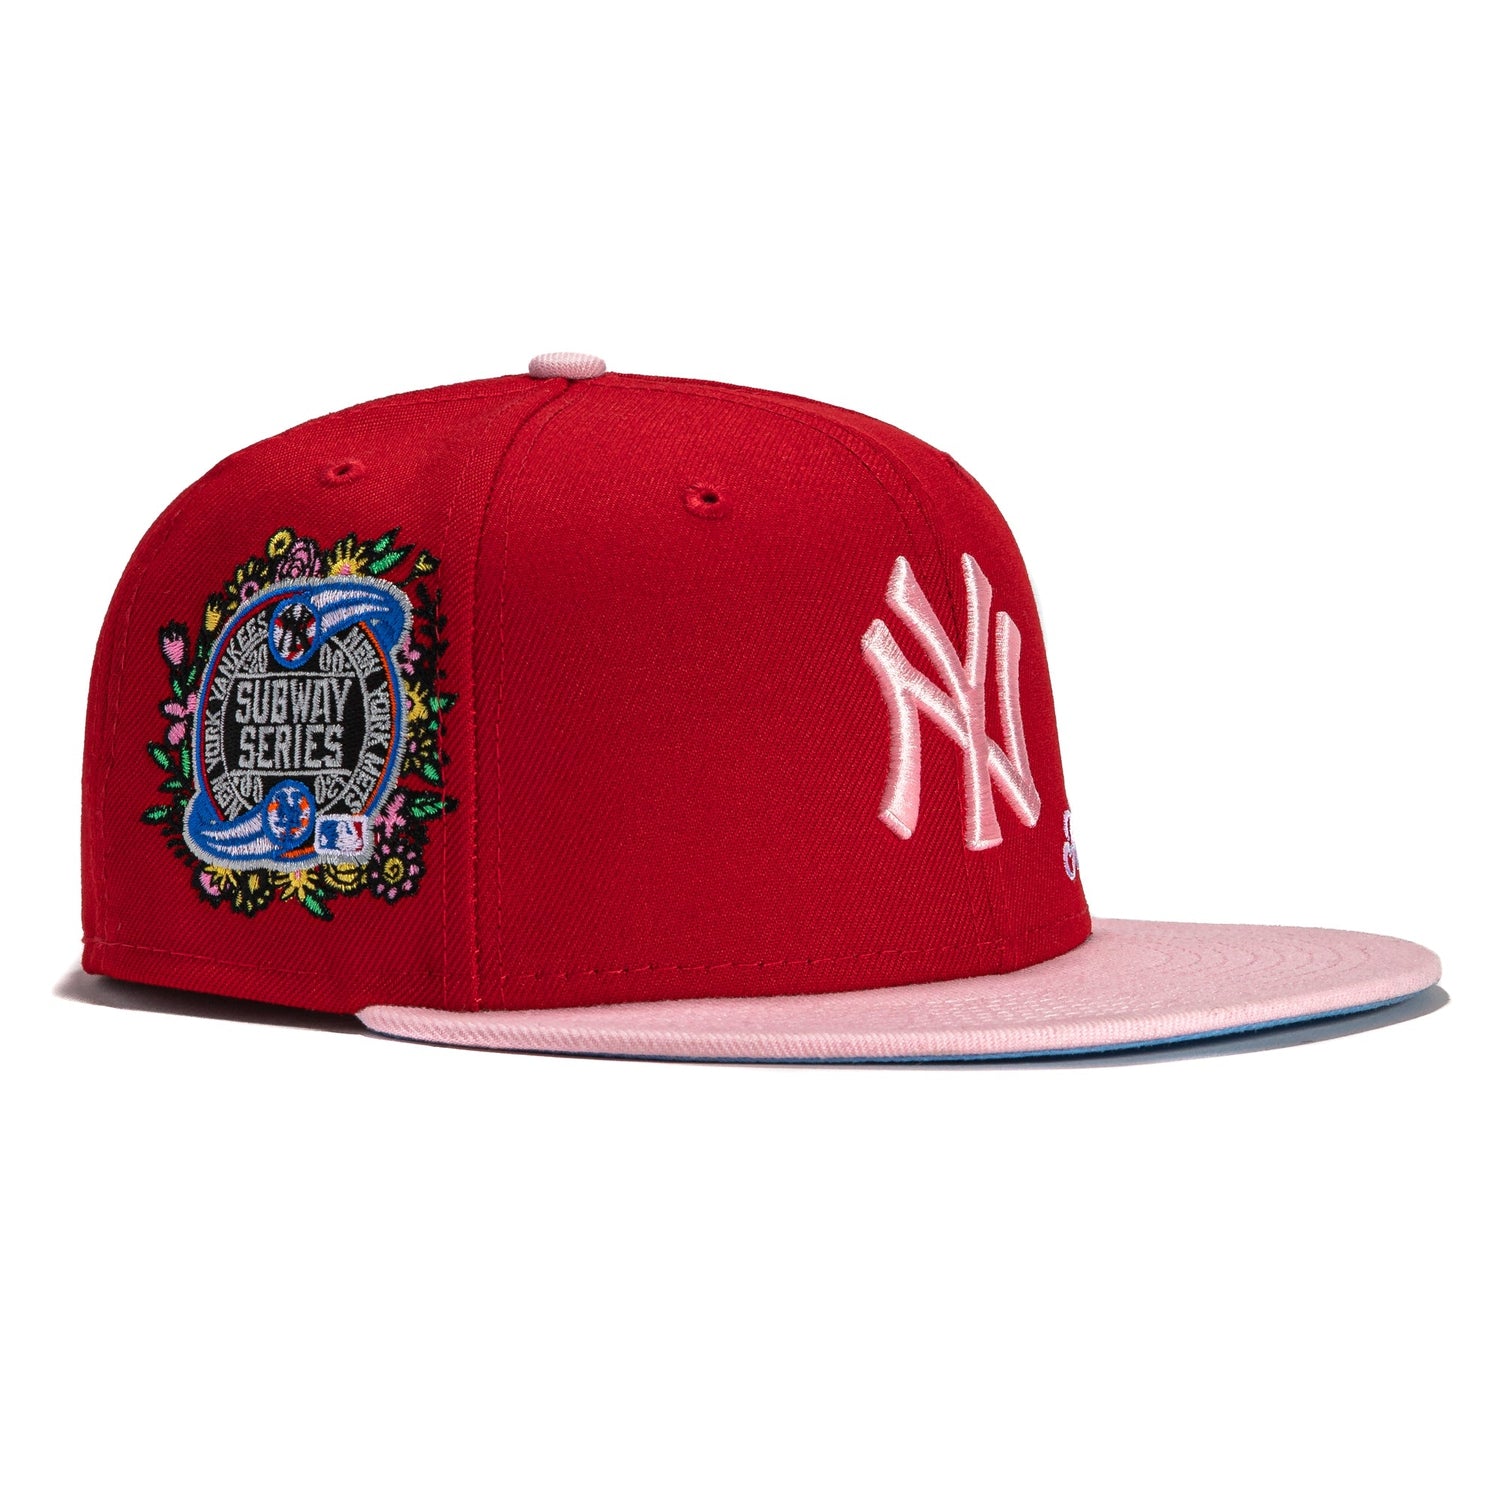 New York Yankees Pink Subway Series 59FIFTY Fitted Hat by New Era